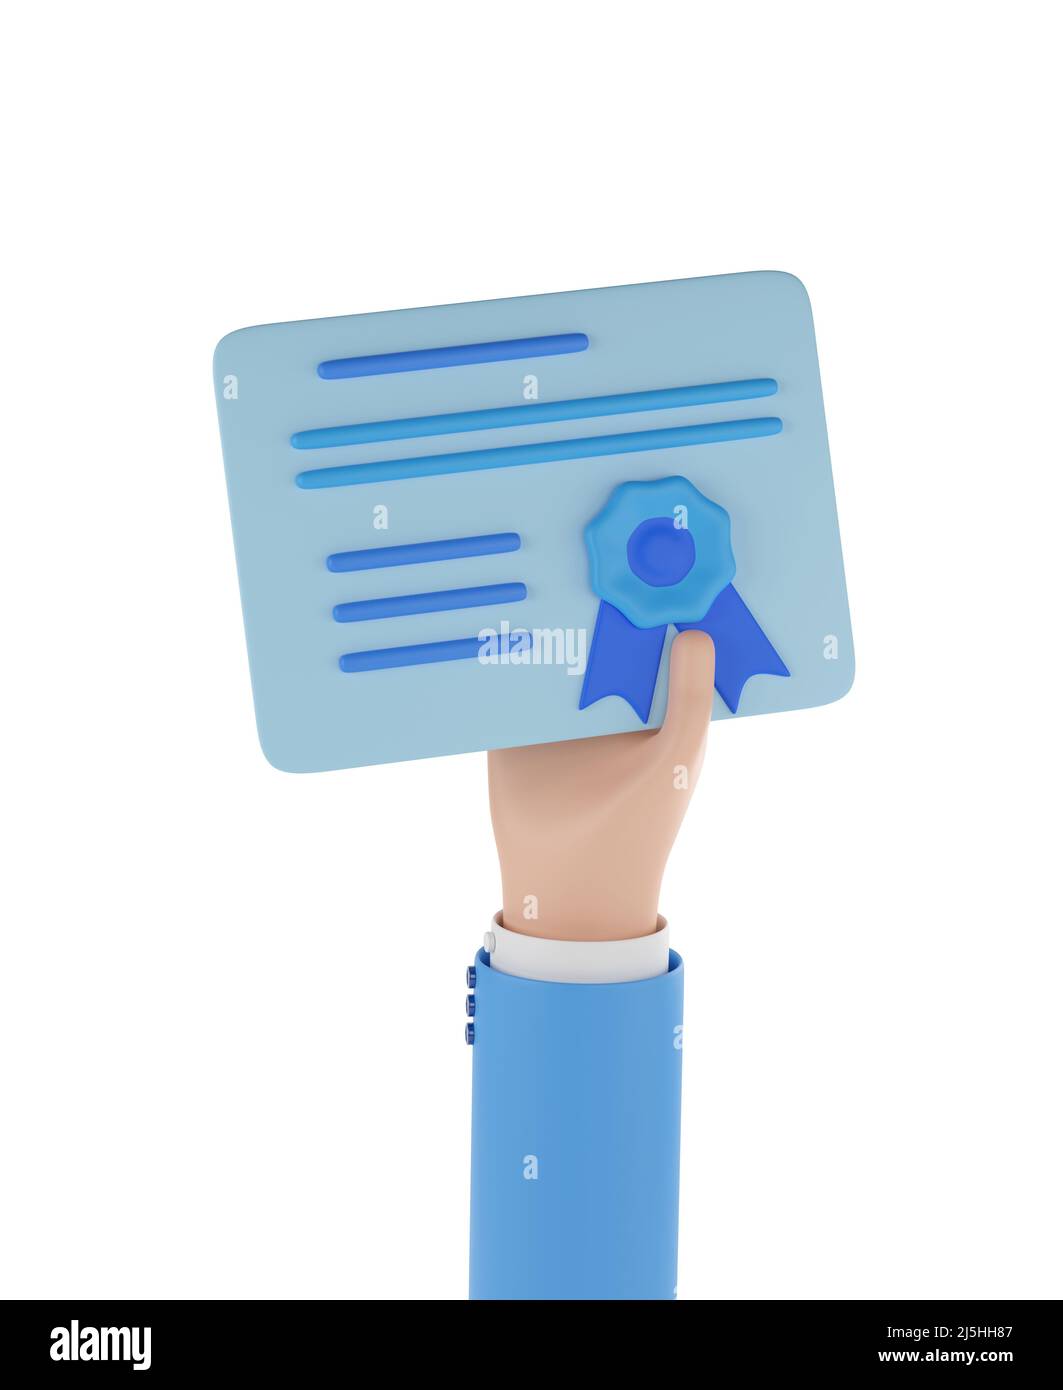 Cartoon hand holding a diploma isolated on white background. 3d Illustration. Stock Photo